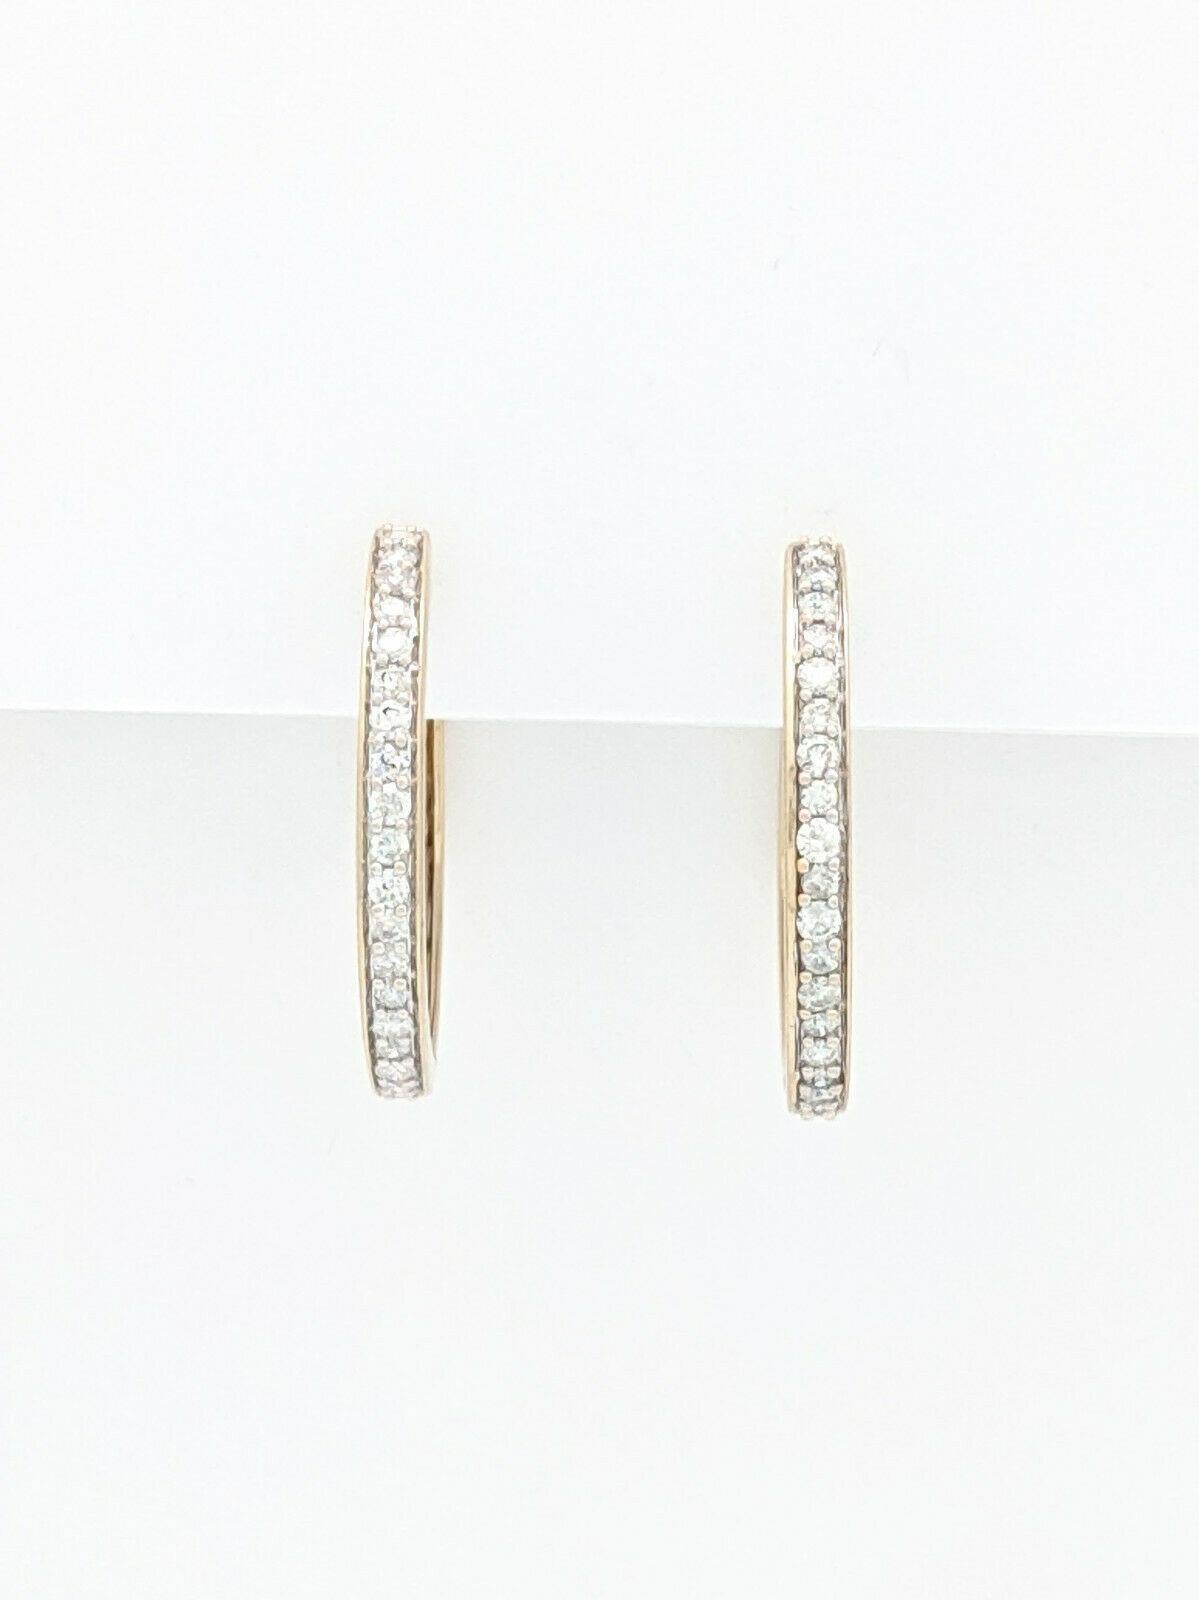 You are viewing a beautiful pair of Diamond Hoop earrings crafted from 14k yellow gold. These beauties weigh 7.6 grams and offer approximately 1.14cts of round brilliant diamonds.

Each hoop measures 19mm in diameter and 3mm in width and feature